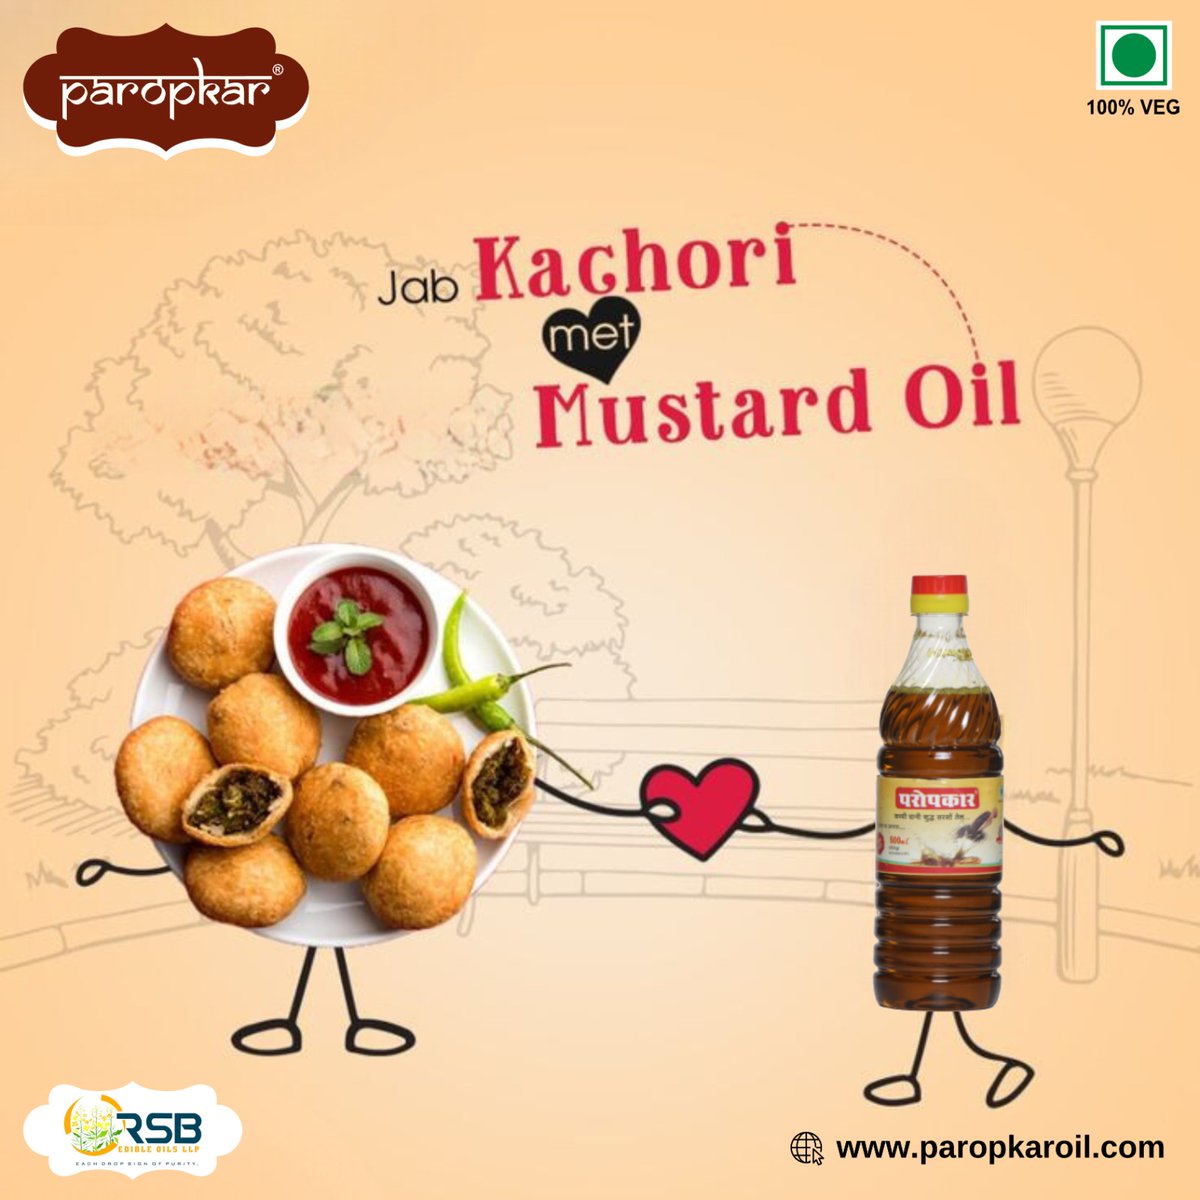 When Kachori meets Mustard Oil, magic happens! 

Experience the authentic taste and aroma with Paropkar's finest. 

Indulge in tradition, savor the flavors.
.
.
.
#ParopkarMagic #KachoriMagic #MustardOilMagic #AuthenticFlavors #TraditionInEveryBite #SavorTheAroma